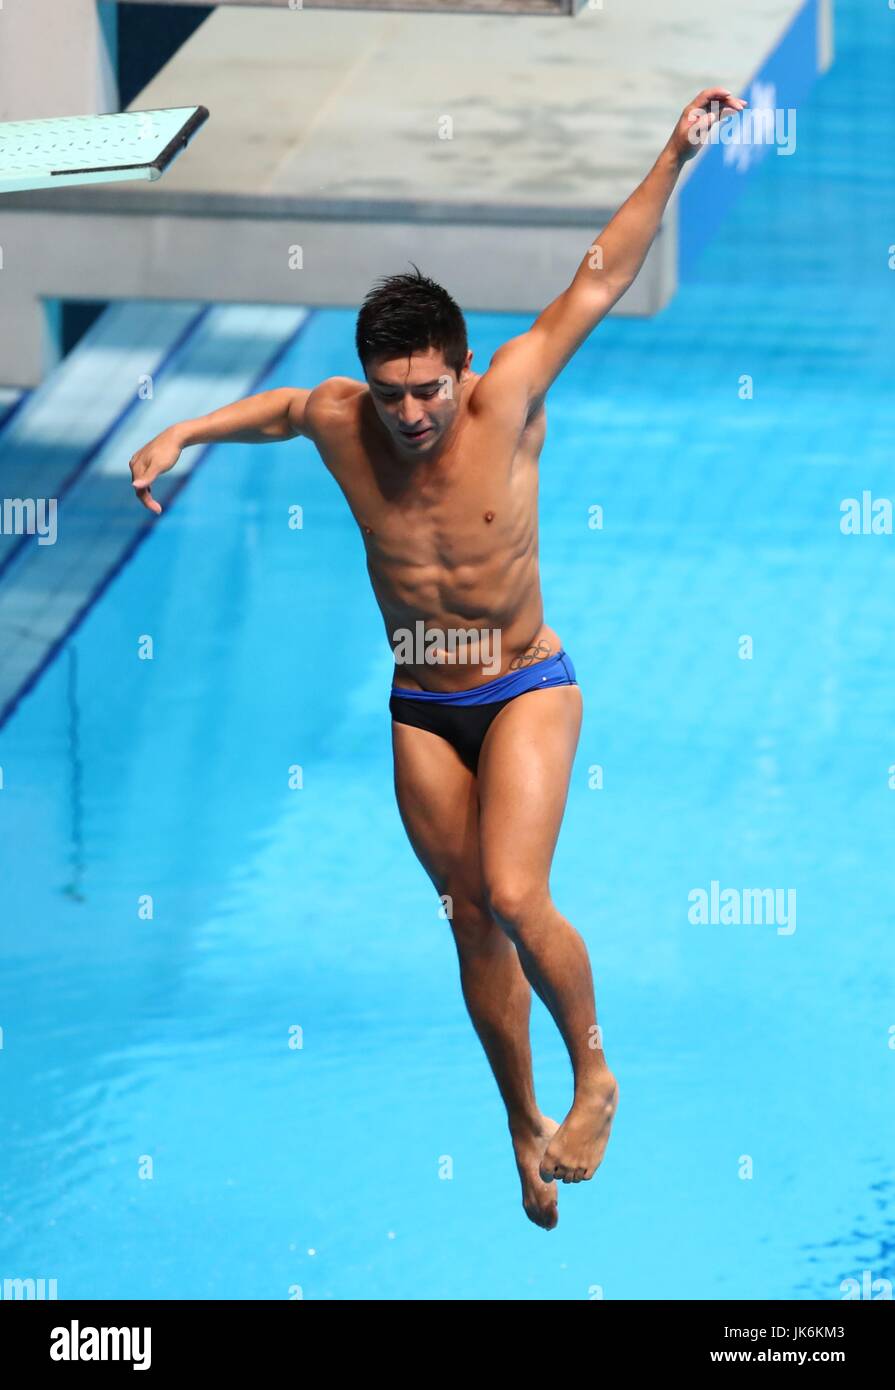 (170723) -- July 23,  2017 (Xinhua) -- Julian Sanchez of Mexico falls from his board accidentally during the Mixed 3m Springboard Synchro final of Diving at the 17th FINA World Championships at Duna Arena in Budapest, Hungary on July 22, 2017. Arantxa Chavez Munoz and Julian Sanchez of Mexico placed 13th with 223.80 points. (Xinhua/Gong Bing) Stock Photo